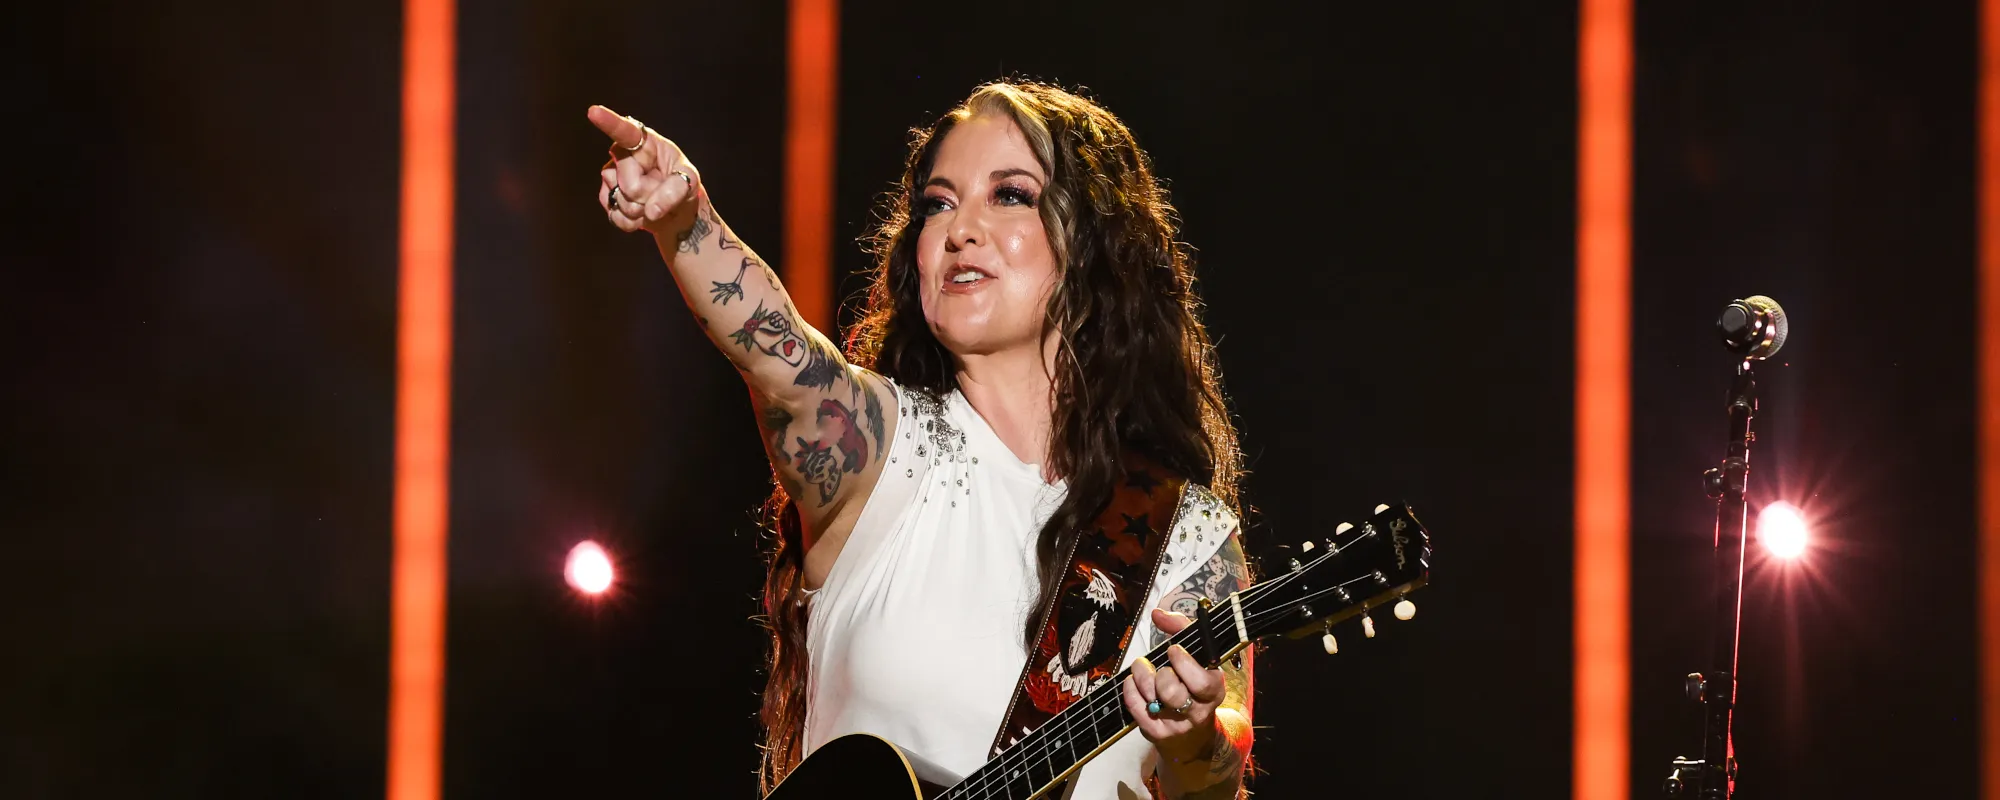 Ashley McBryde Says There’s Friendly Competition, “Trash Talk” Between Artists at the CMA Awards